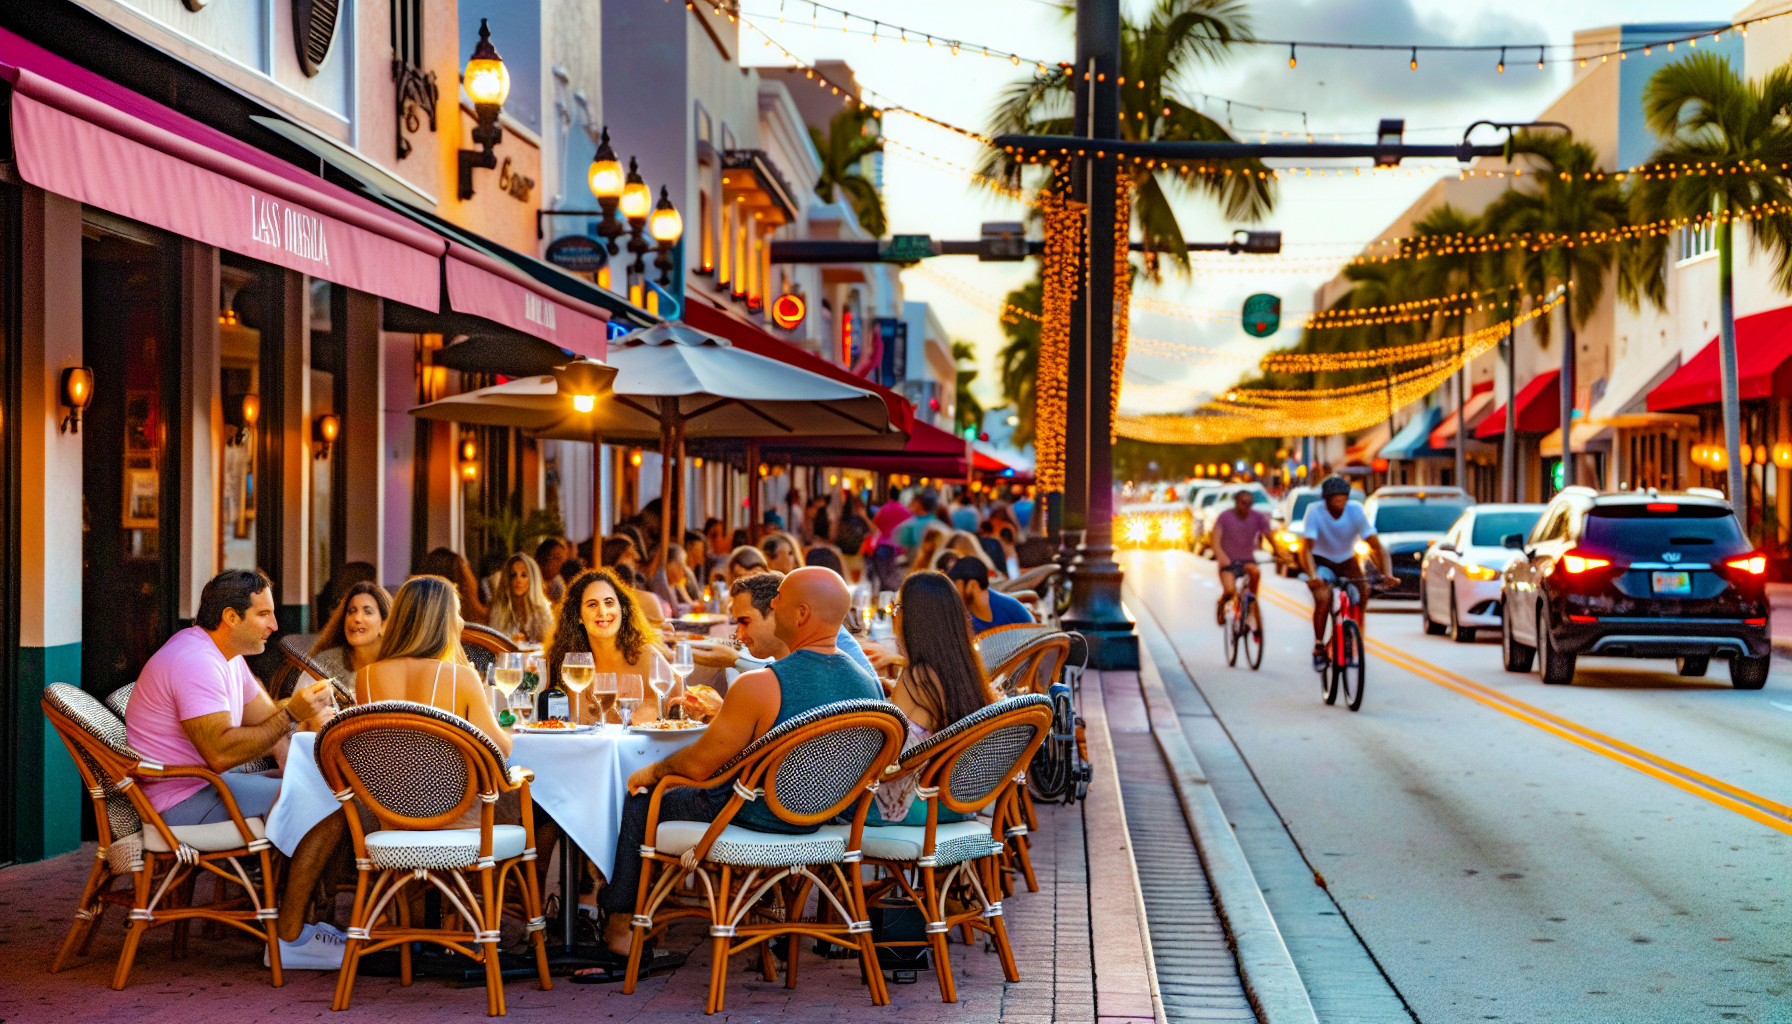 A bustling street with outdoor seating at an Italian restaurant